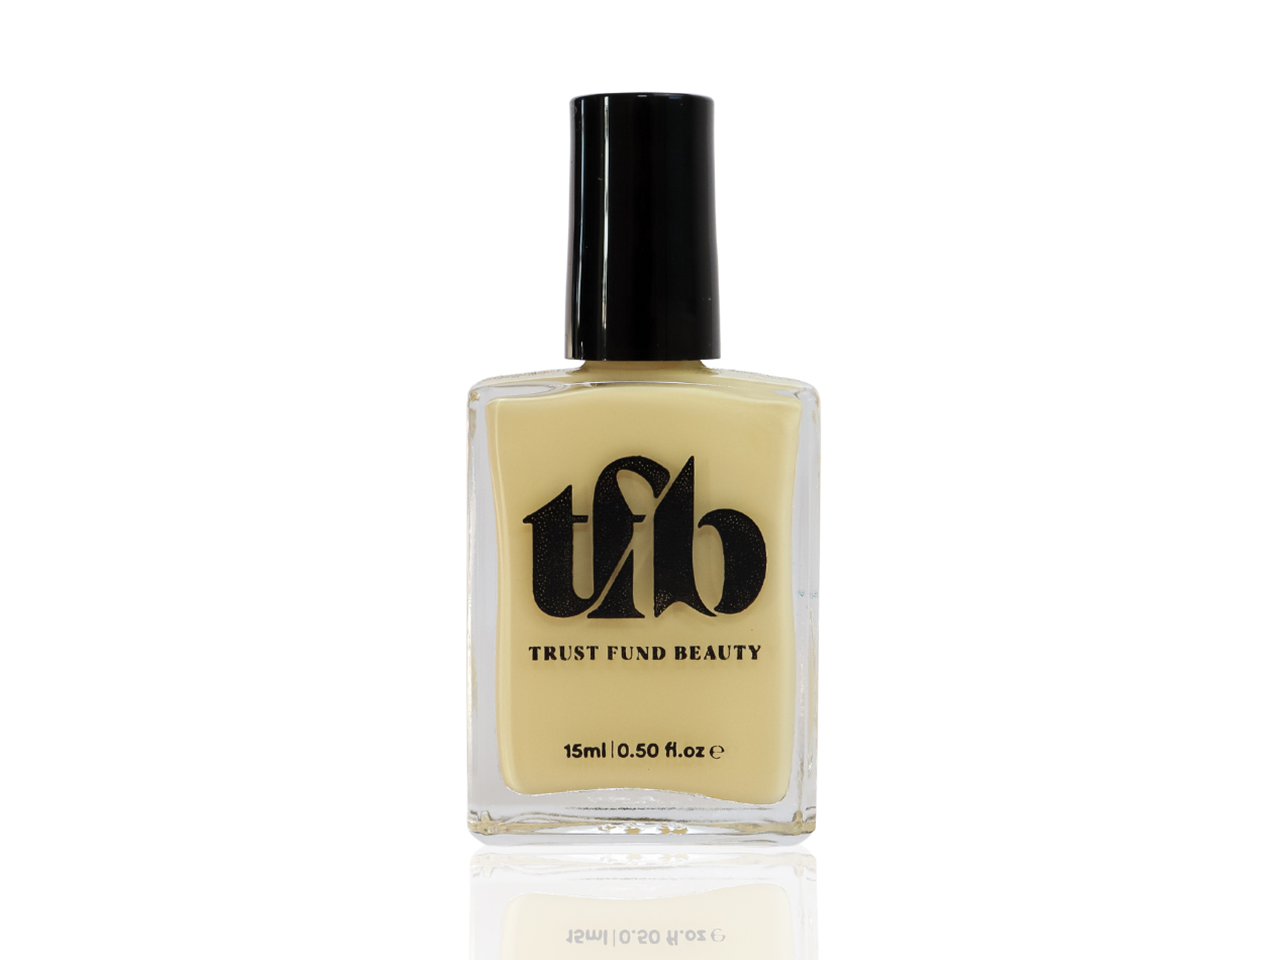 A bottle of Trust Fund Beauty nail polish in Never Boring, a neon yellow shade.